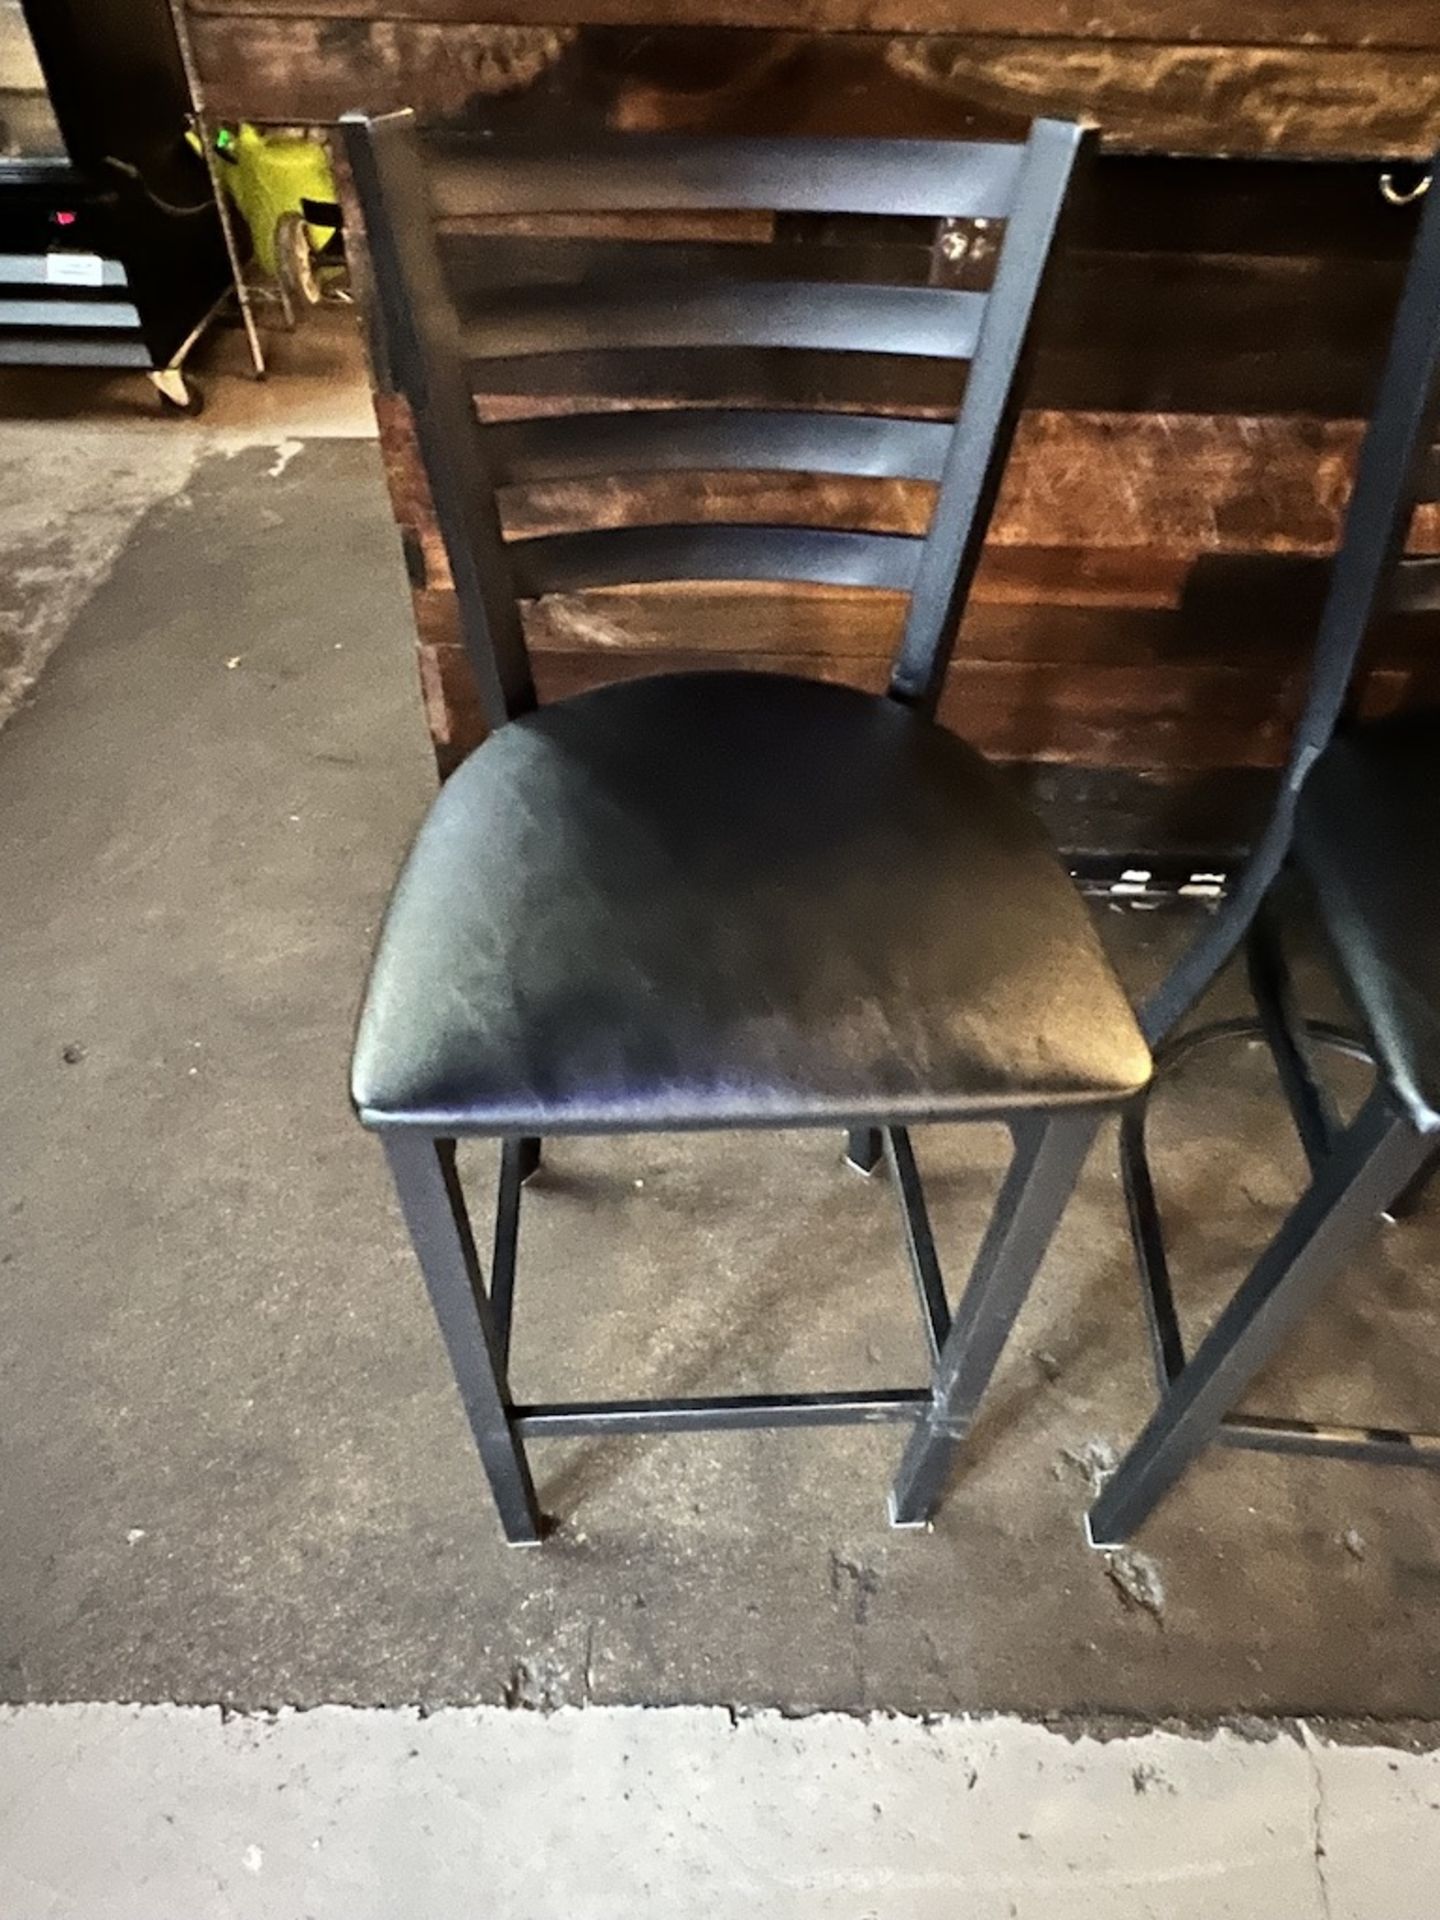 LOT OF: (4) HI-TOP PADDED CHAIRS W/ METAL FRAME - Image 5 of 6